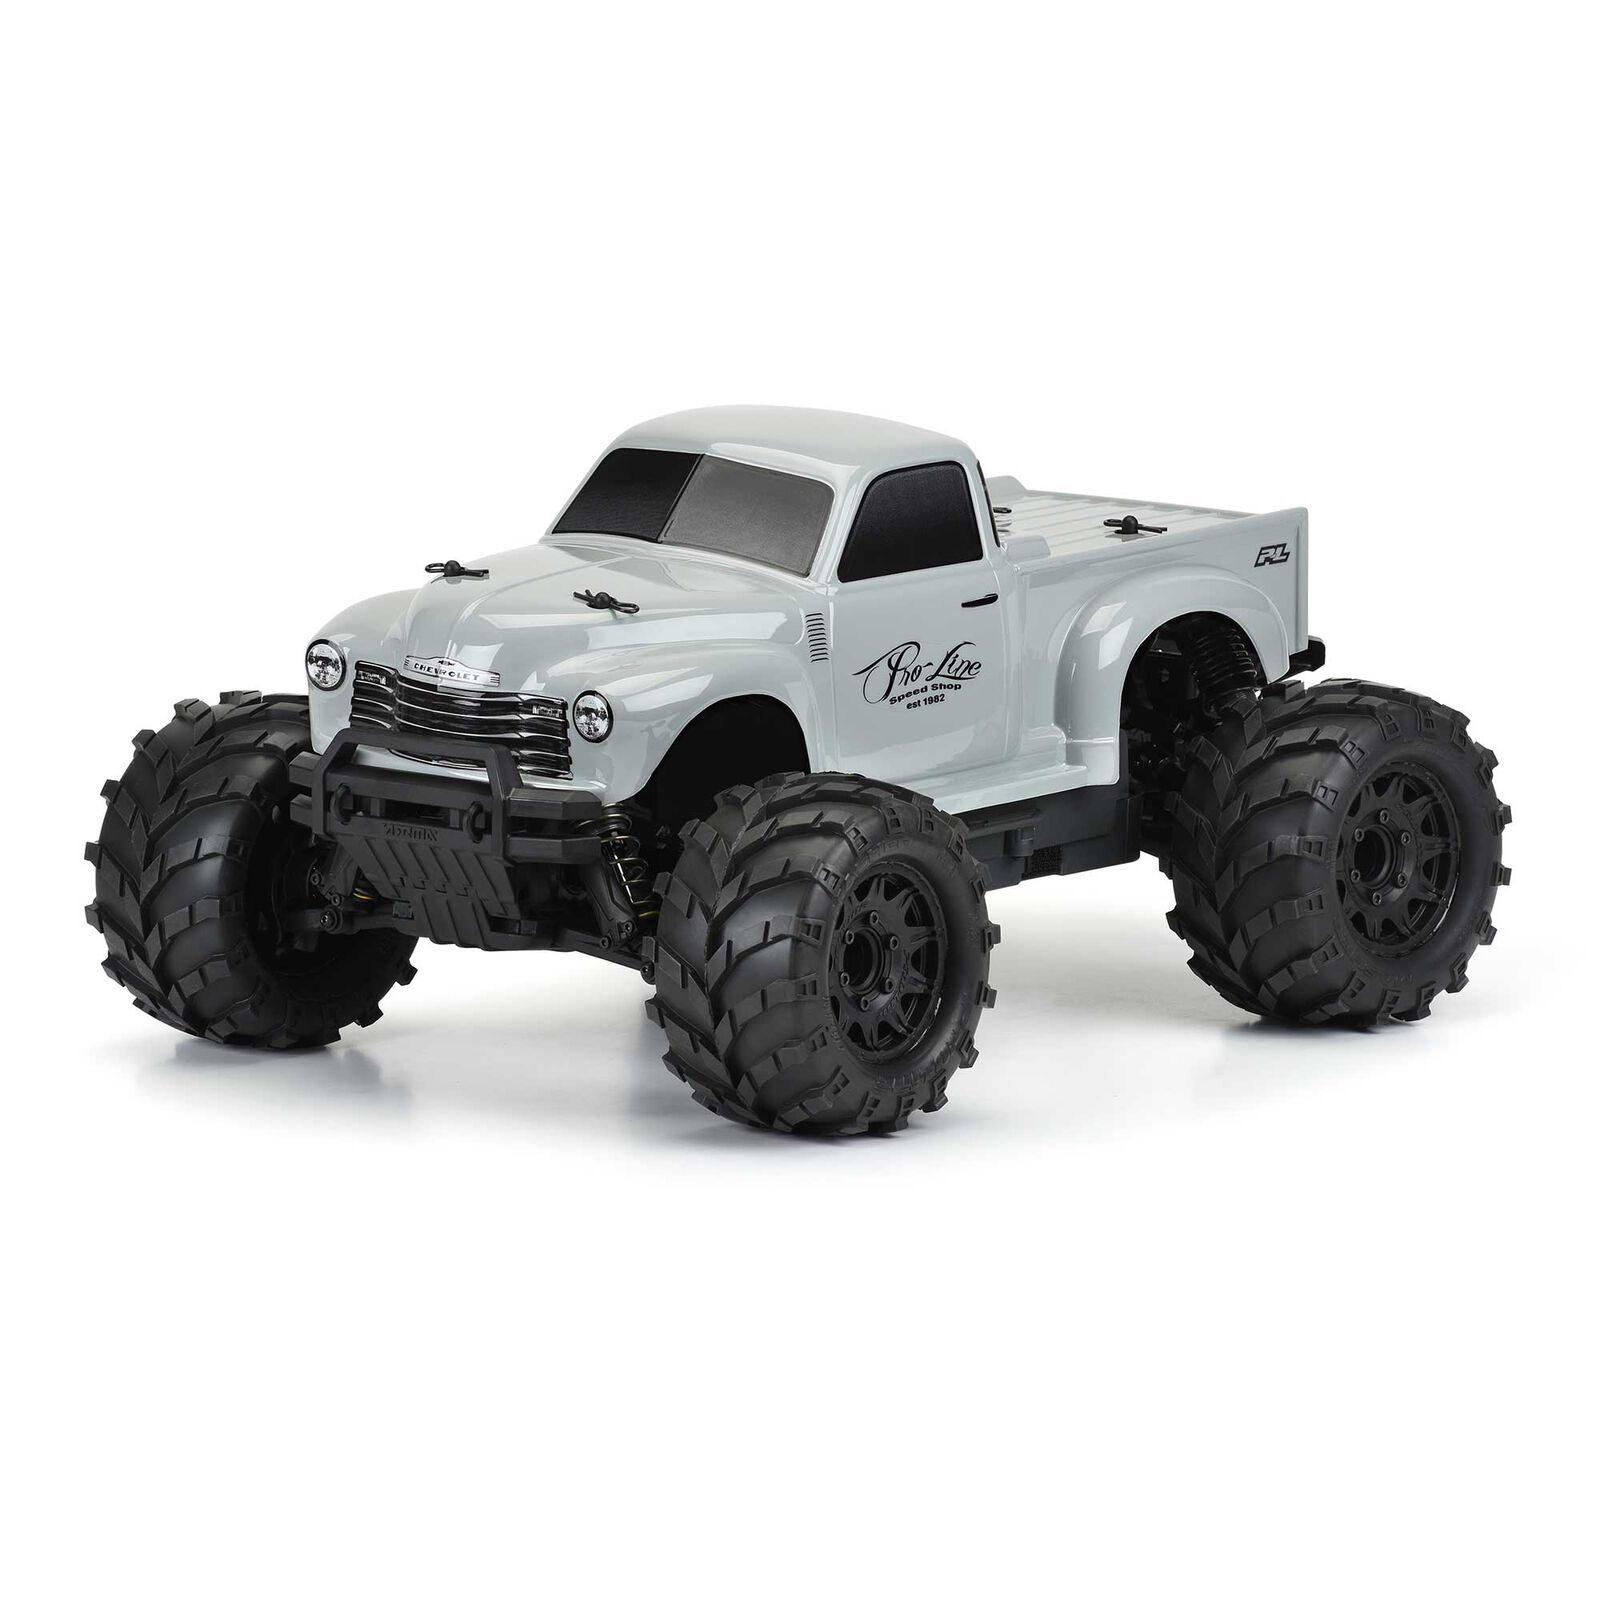 Proline 1/10 Early 50's Chevy Tough-Color Gray Body Traxxas Stampede & Arrma Granite